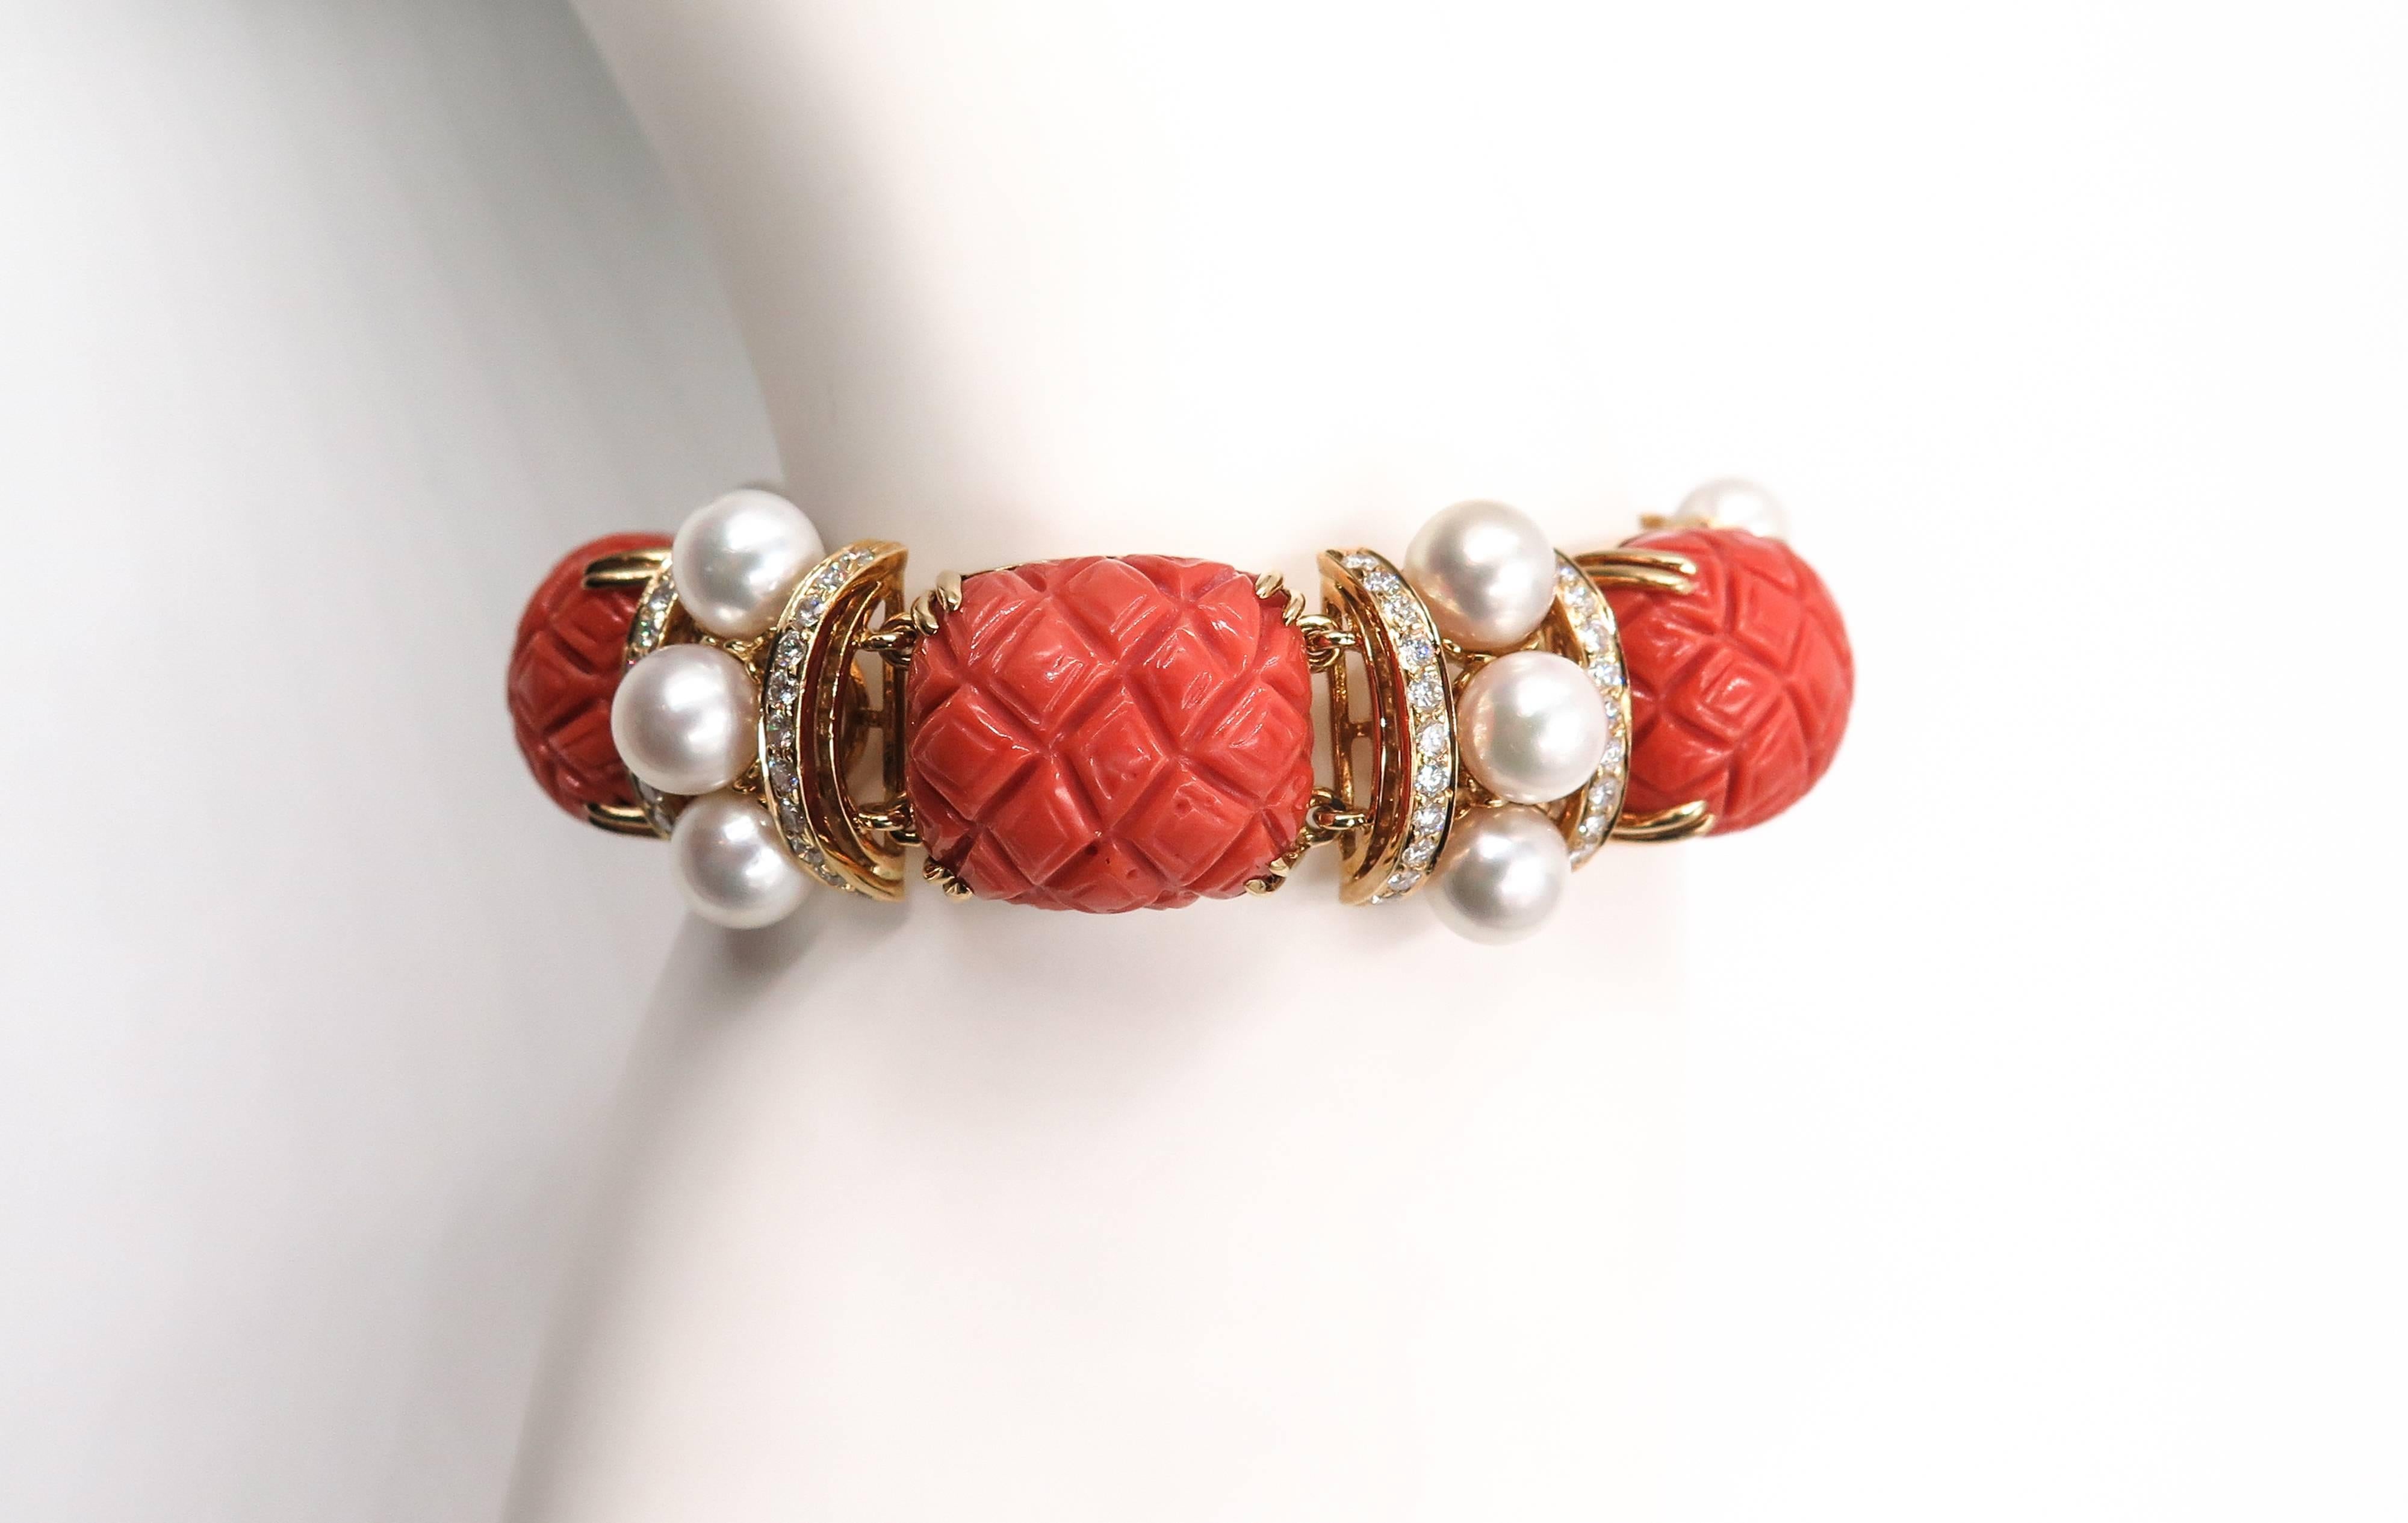 Carved Coral, Pearls and Diamond Bracelet by Seaman Schepps 7